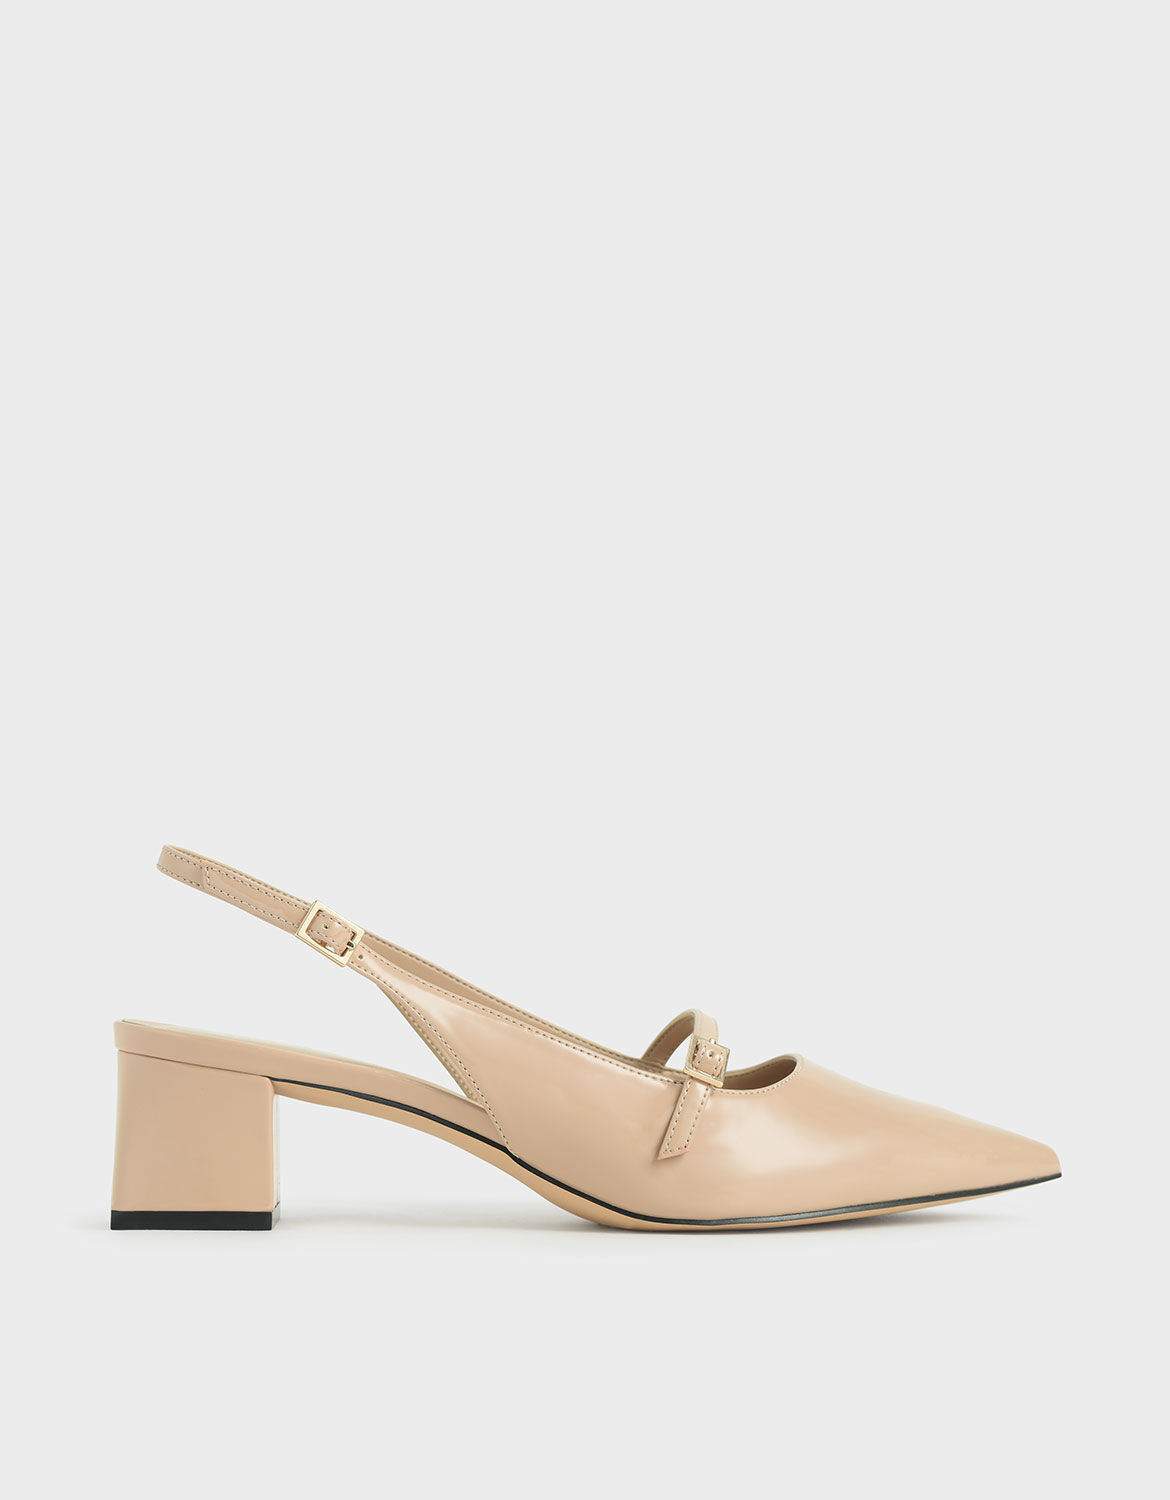 Nude Patent Mary Jane Slingback Pumps 